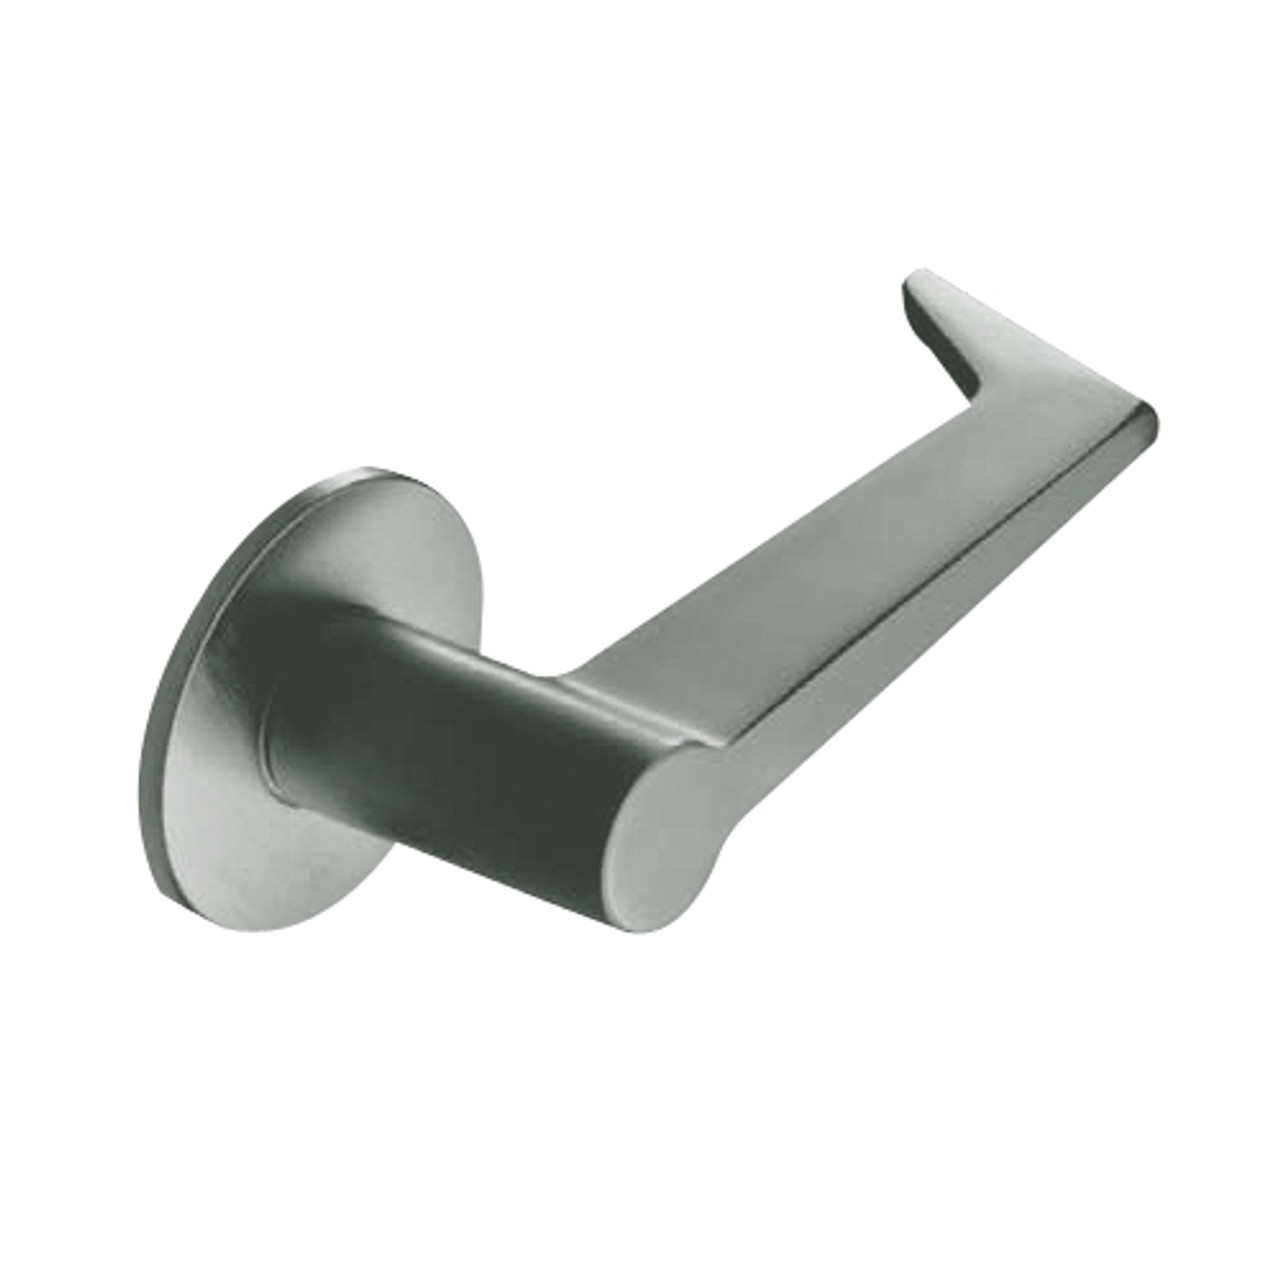 ML2069-ESF-619-LC Corbin Russwin ML2000 Series Mortise Institution Privacy Locksets with Essex Lever in Satin Nickel